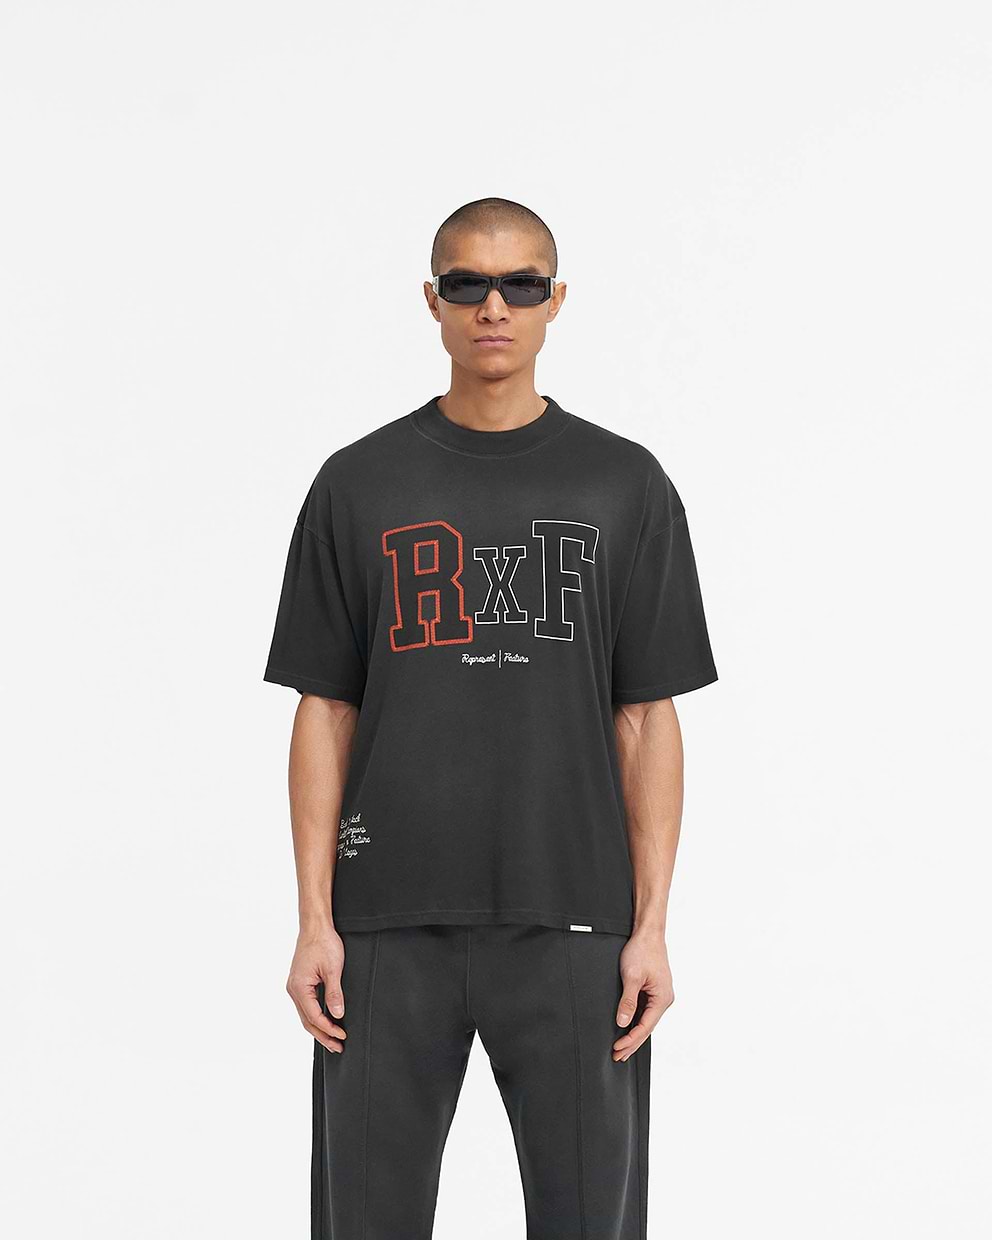 Represent X Feature Champions T-Shirt - Stained Black